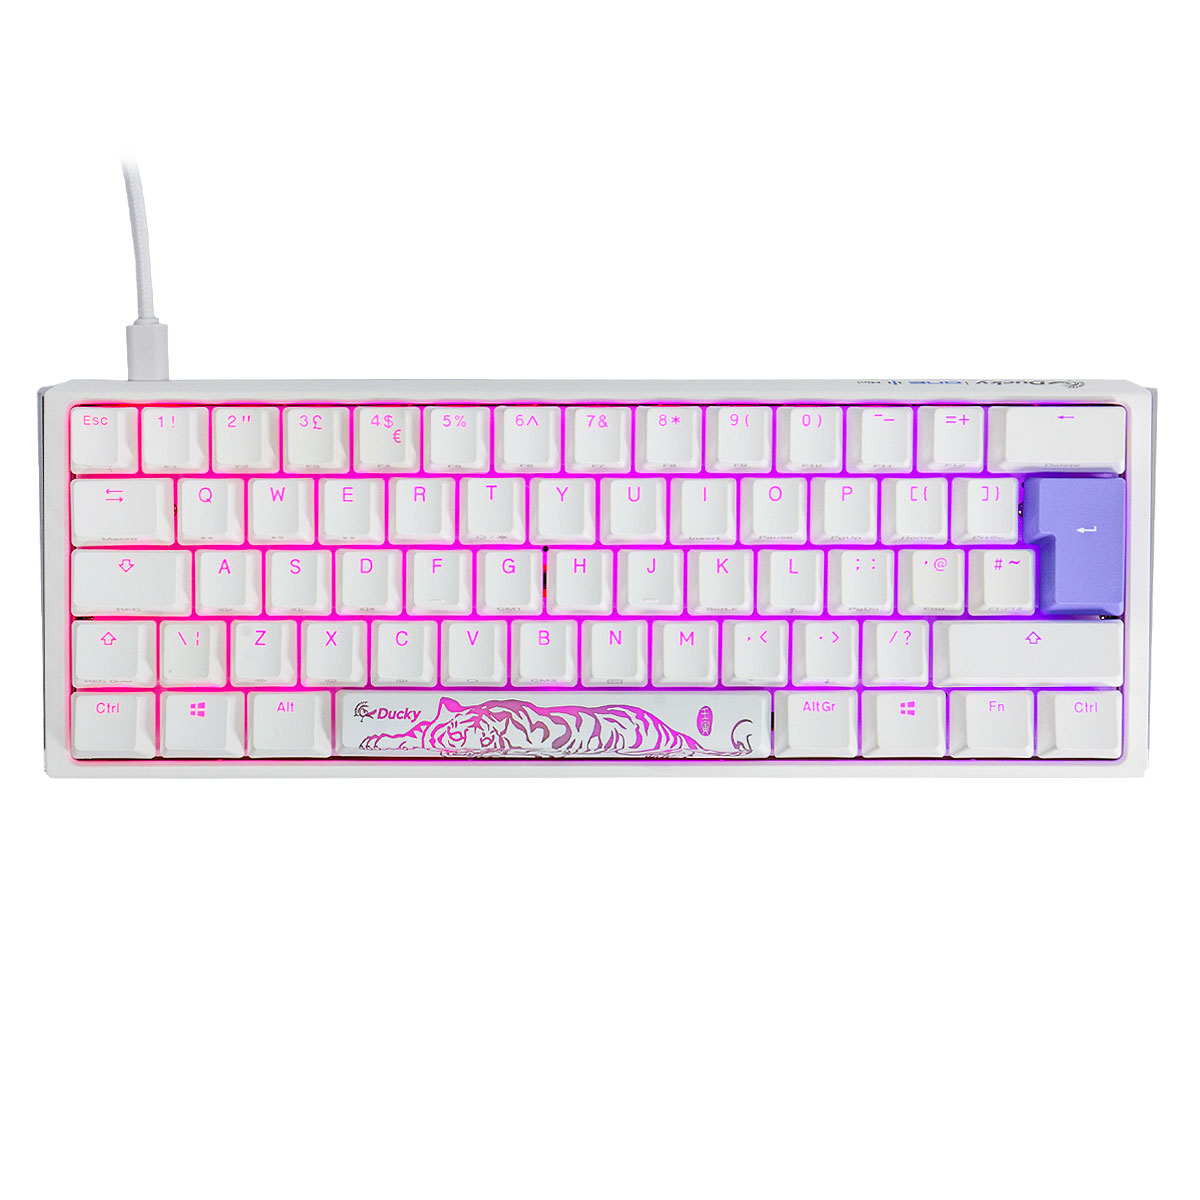 Ducky One 3 Classic 60 USB RGB Mechanical Gaming Keyboard Cherry Silver - Pure White UK Layout